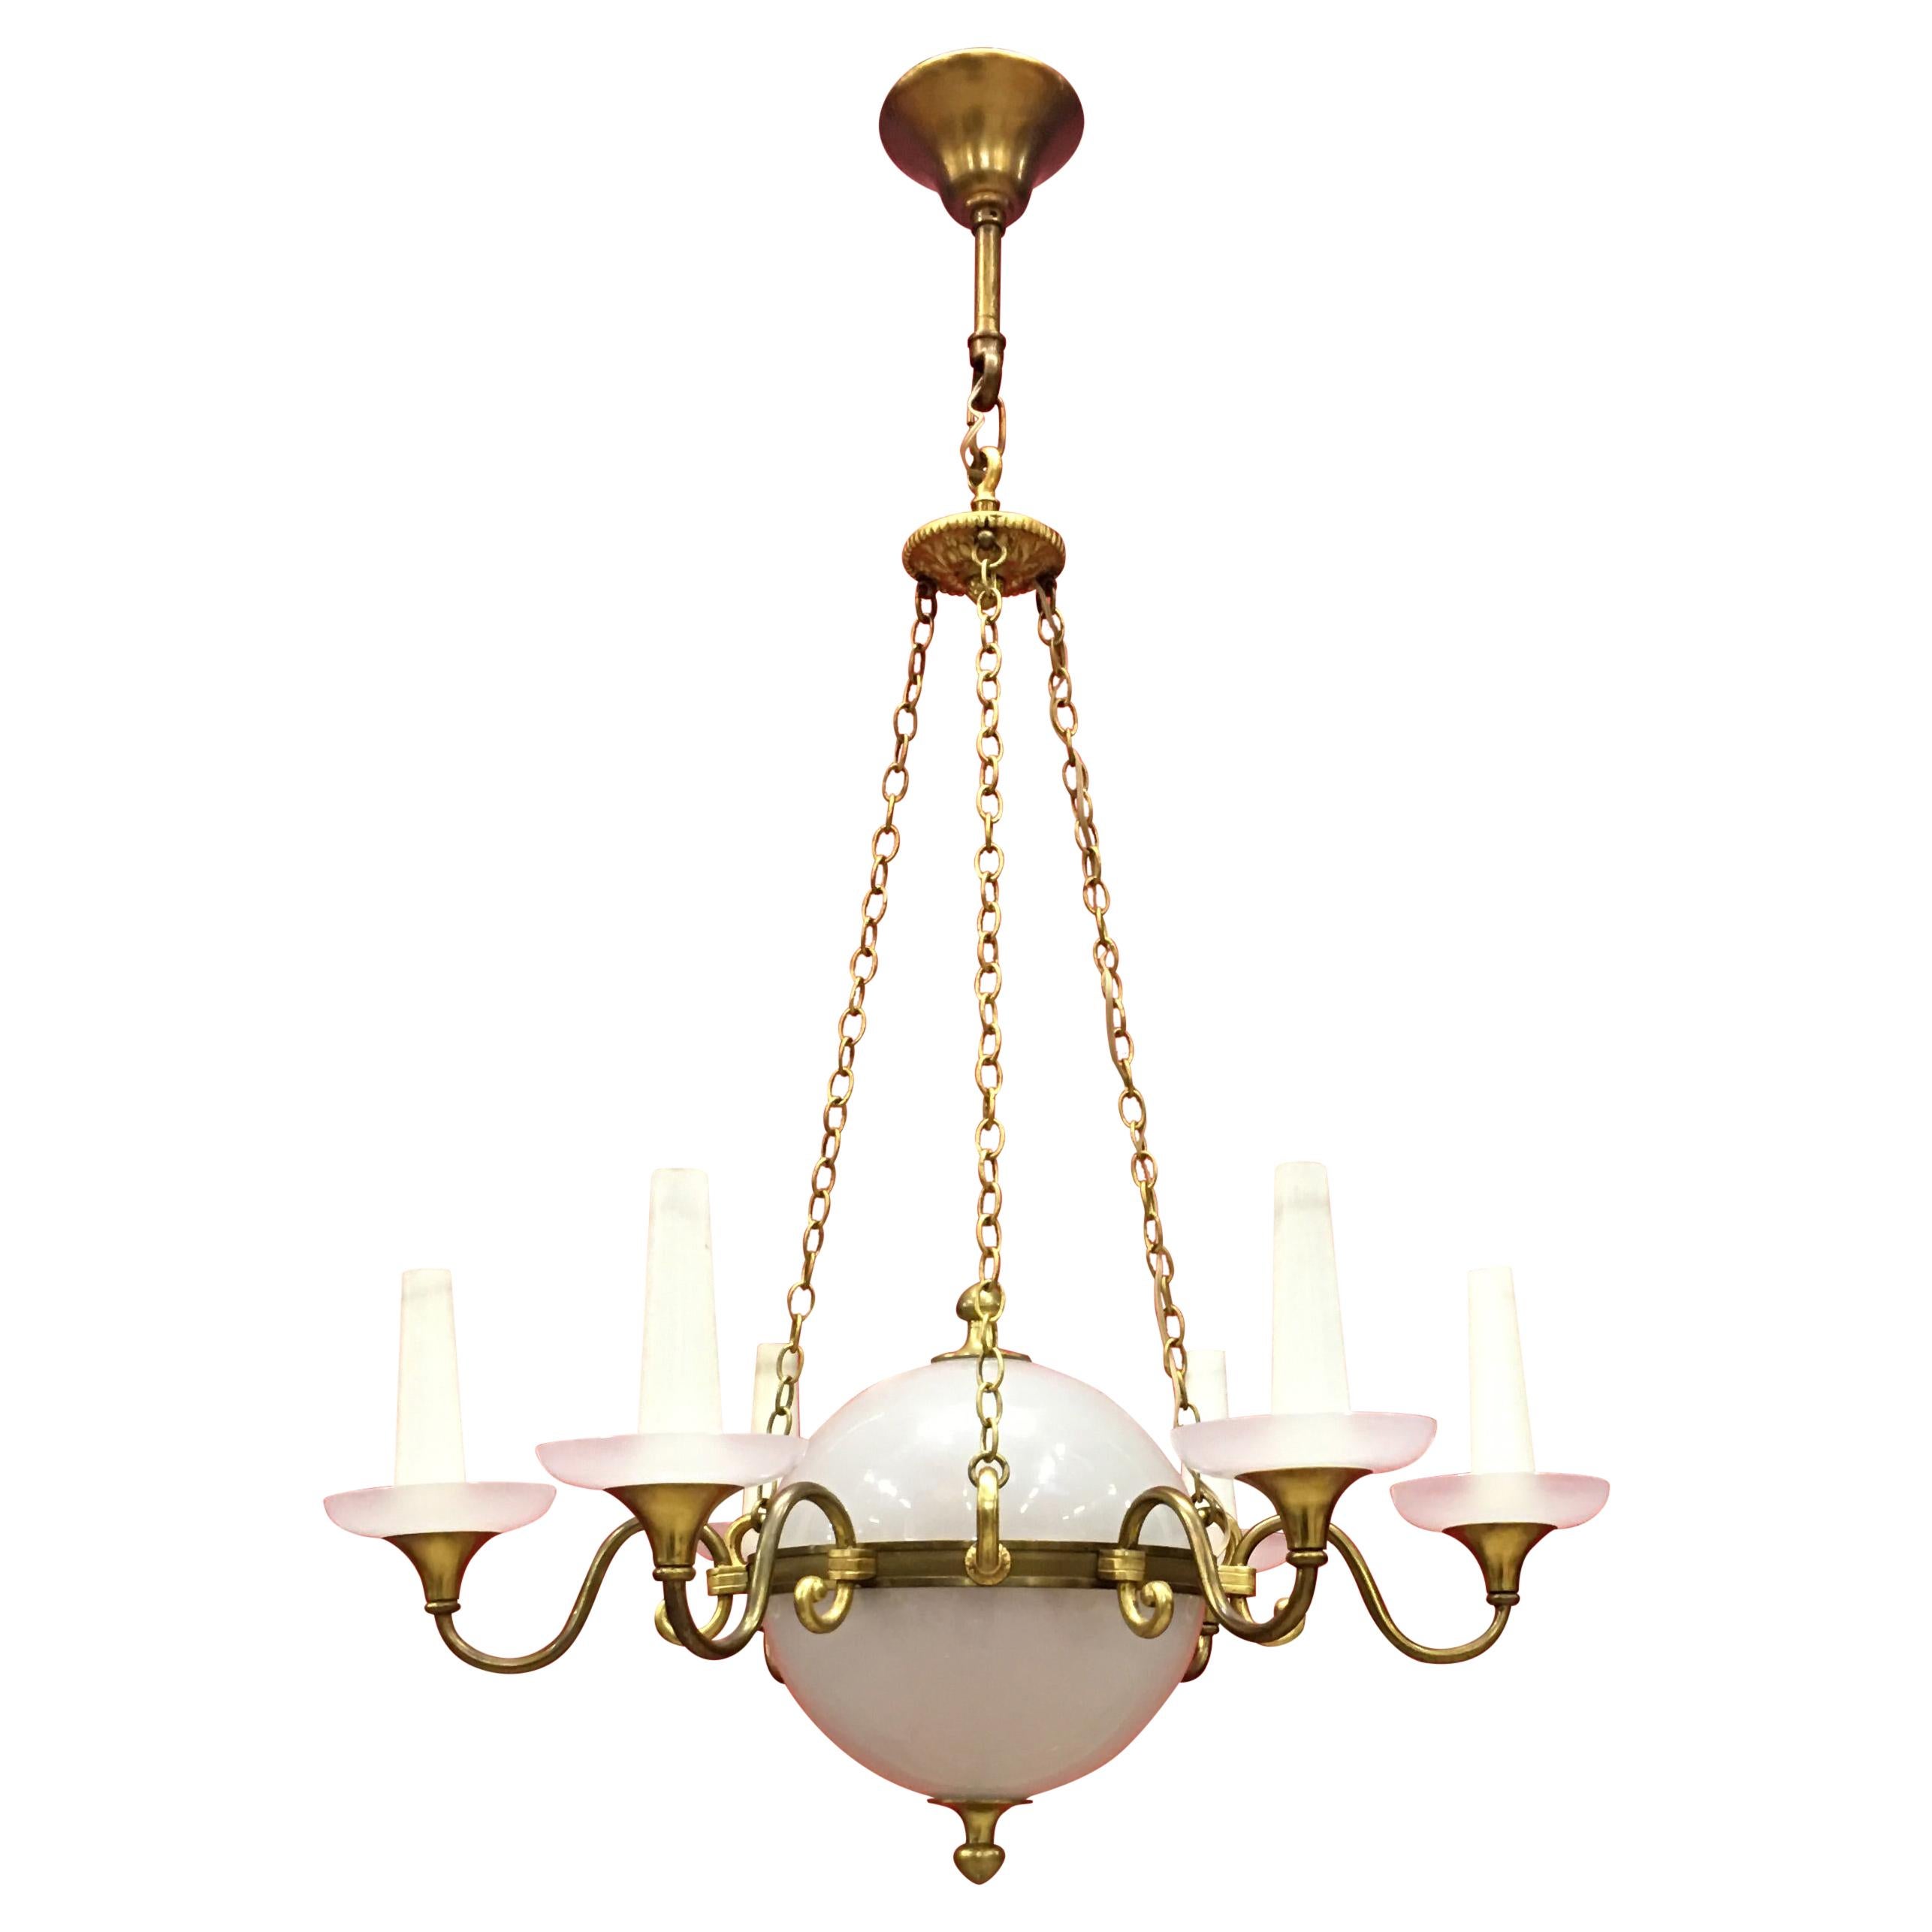 Old Chandelier in White Opaline and Bronze, circa 1930-1950